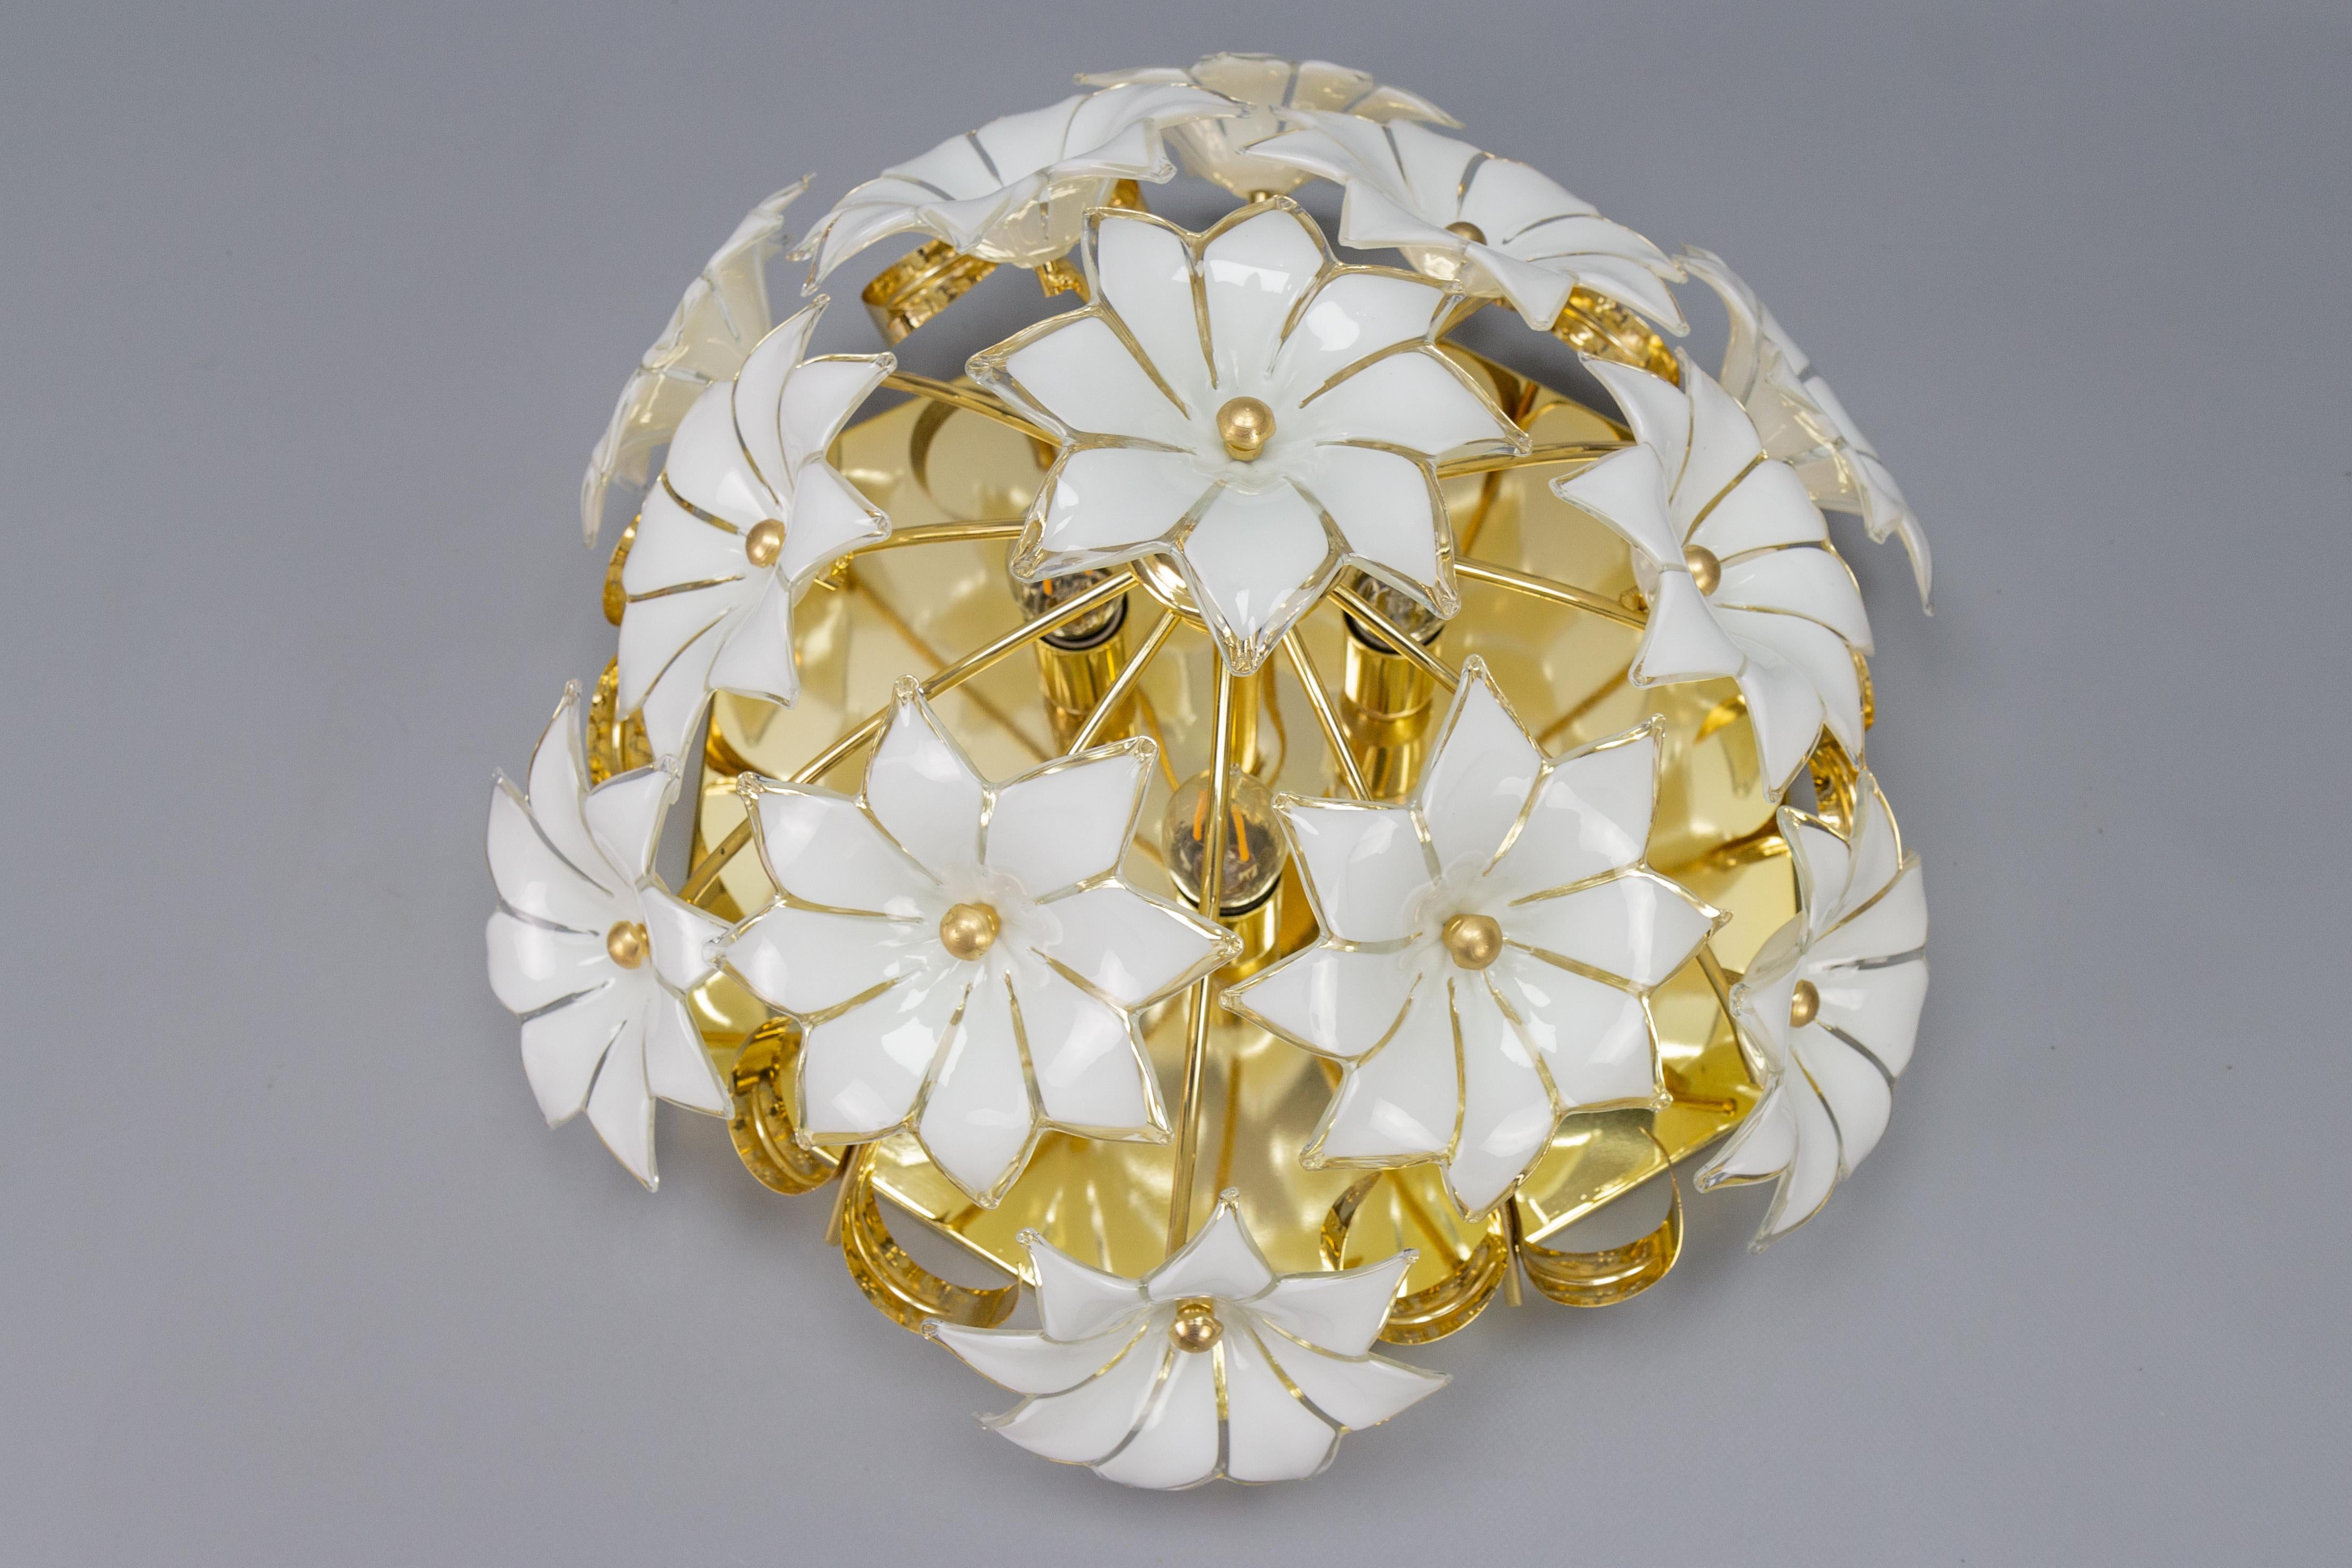 Adorable Italian three-light flush mount or ceiling light with twelve white and clear glass flowers from circa the 1970s. Each beautiful Murano glass flower is hand blown and therefore all twelve are slightly different. This ceiling light fixture